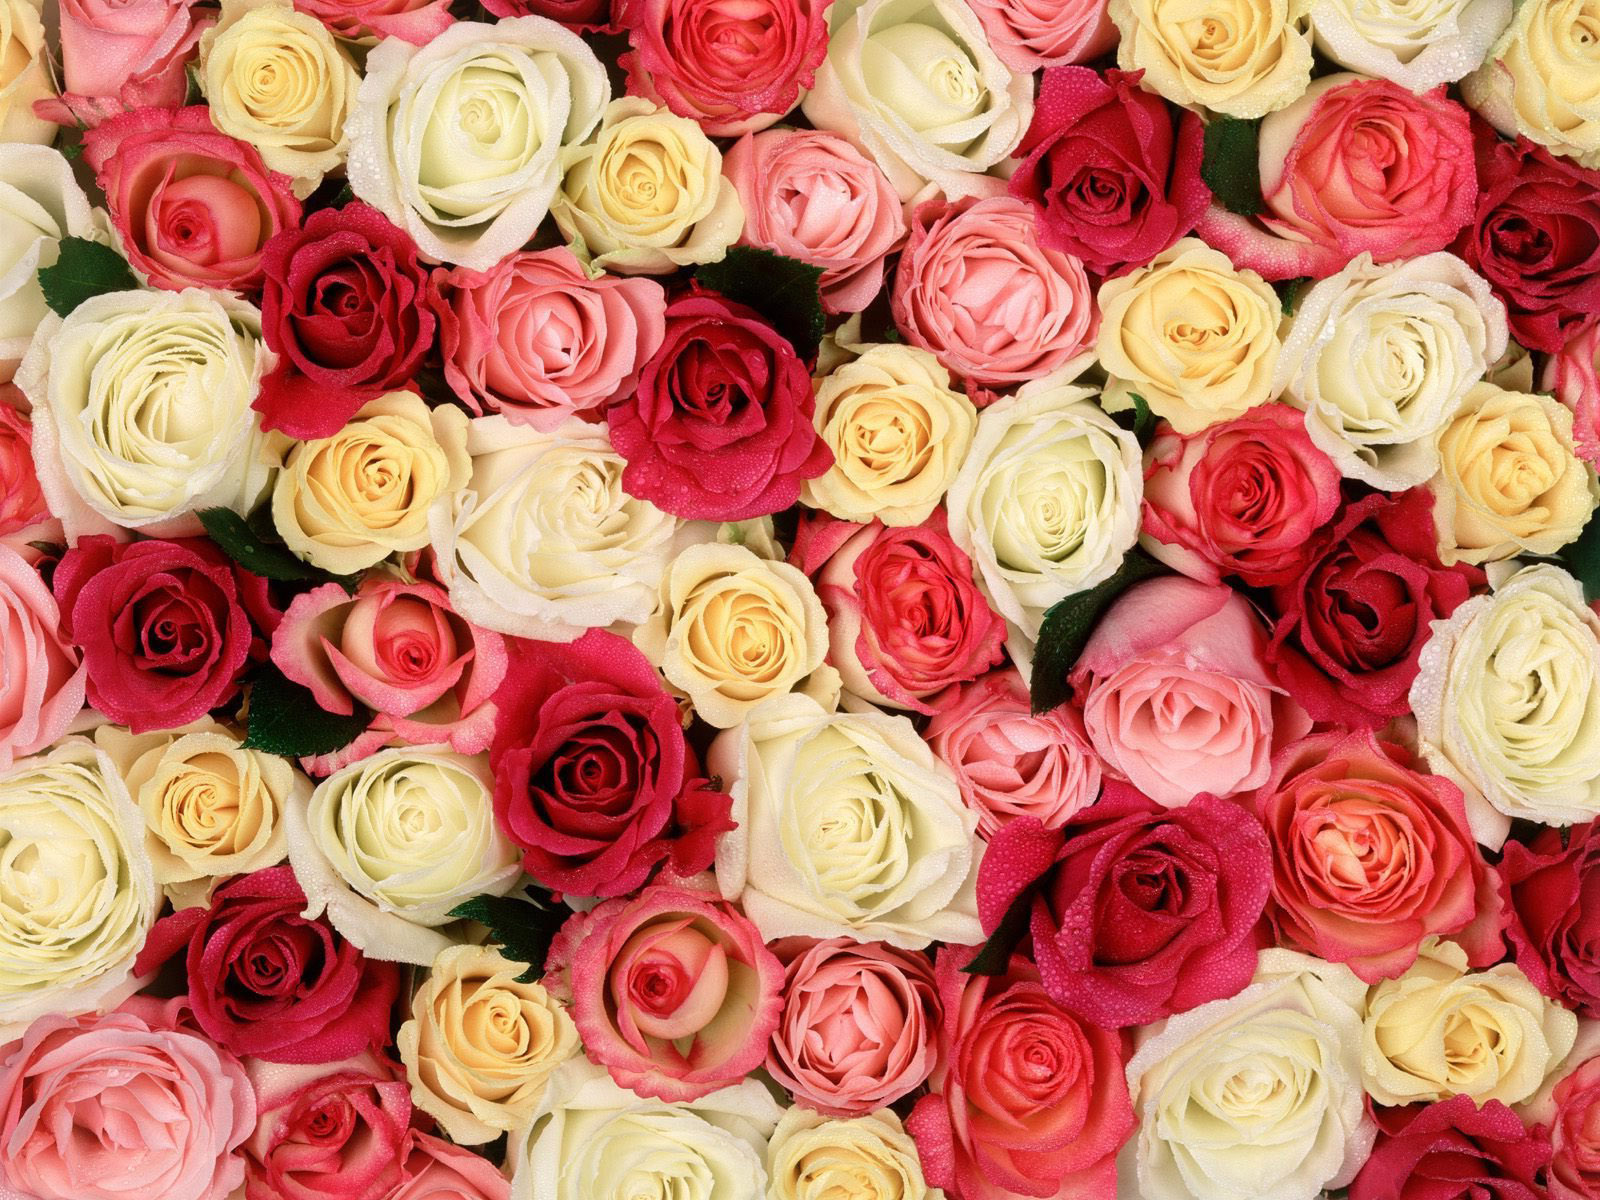 Roses Background Gallery Yopriceville High Quality